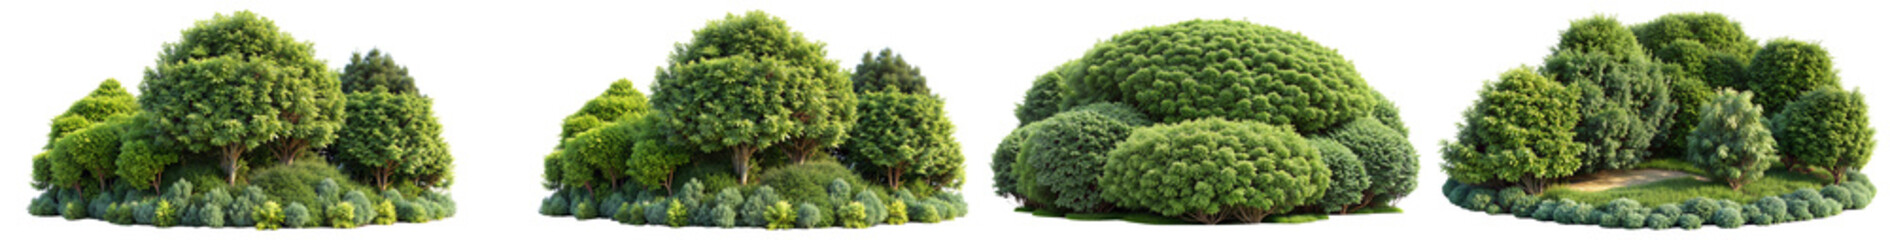 set of forest foliage with plants,bush and shrubs, isolated on white background with clipping path, cutout.